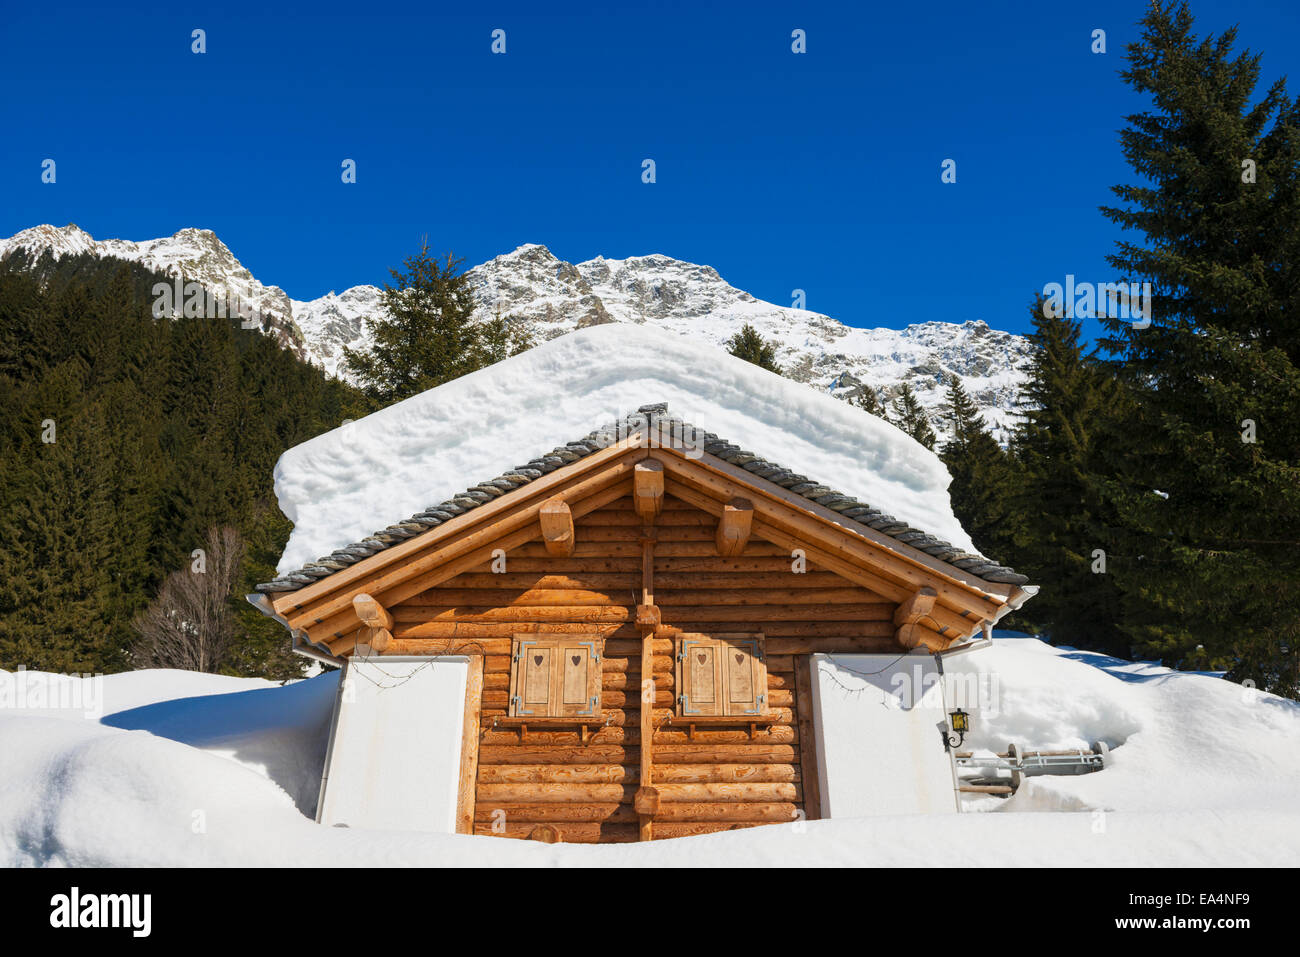 Snow covered log cabin with a mountain range in the background; San Bernardino, Grisons, Switzerland Stock Photo